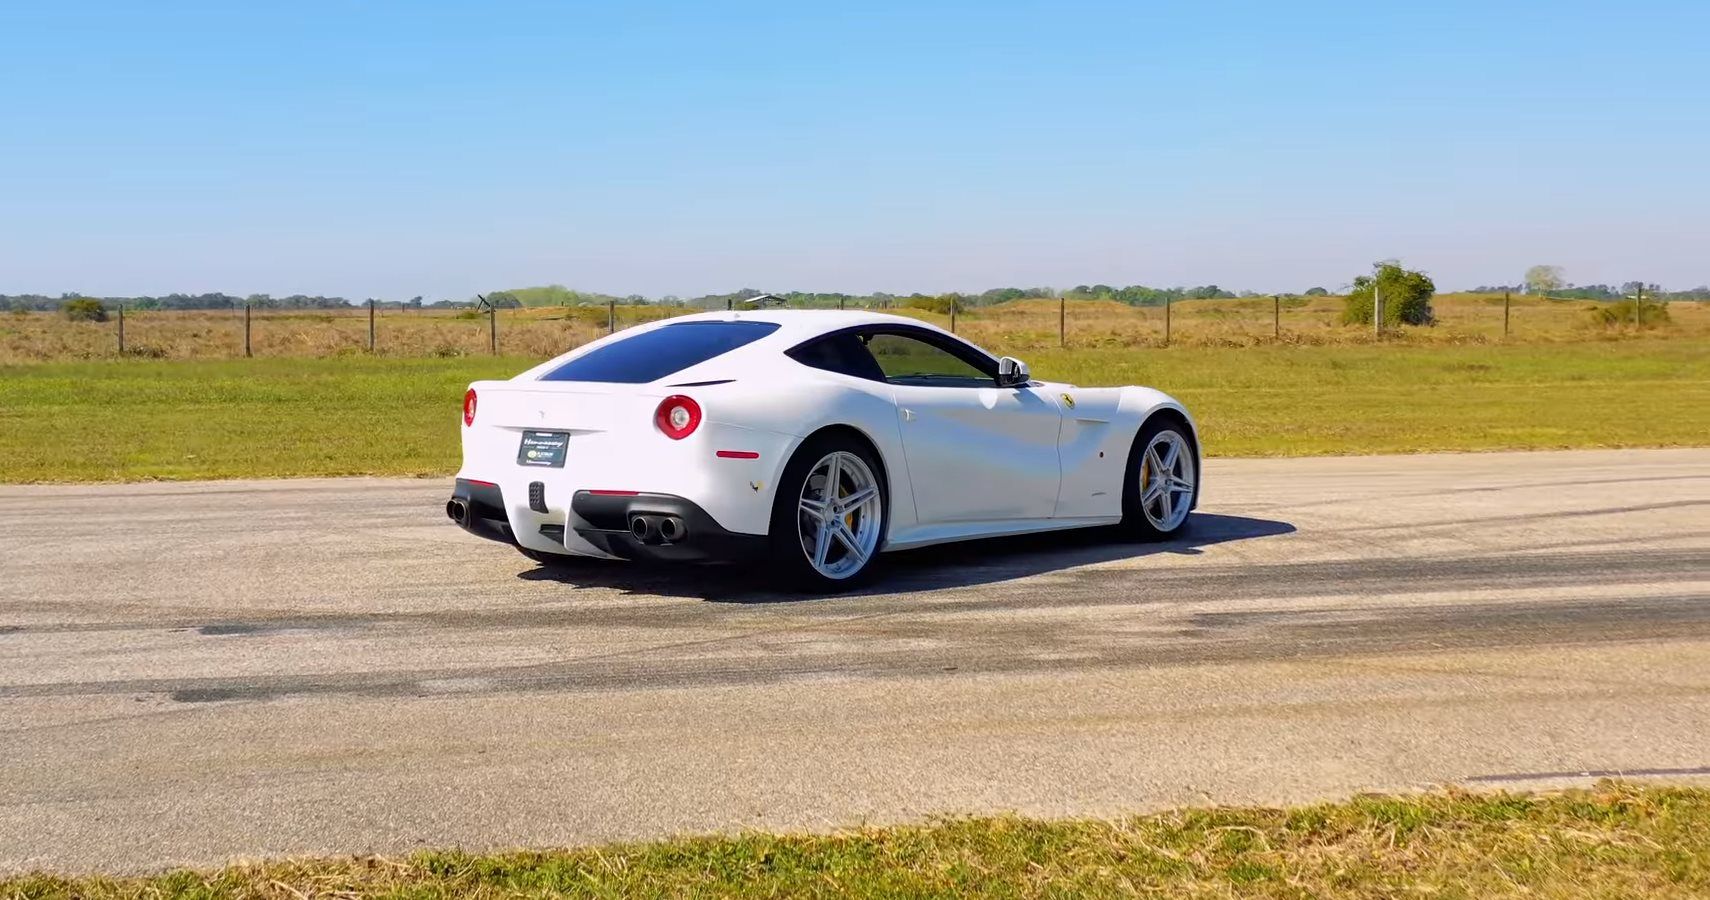 Hennessey Has Made An 800 HP Ferrari F12 And We Don't Know How To Feel About It